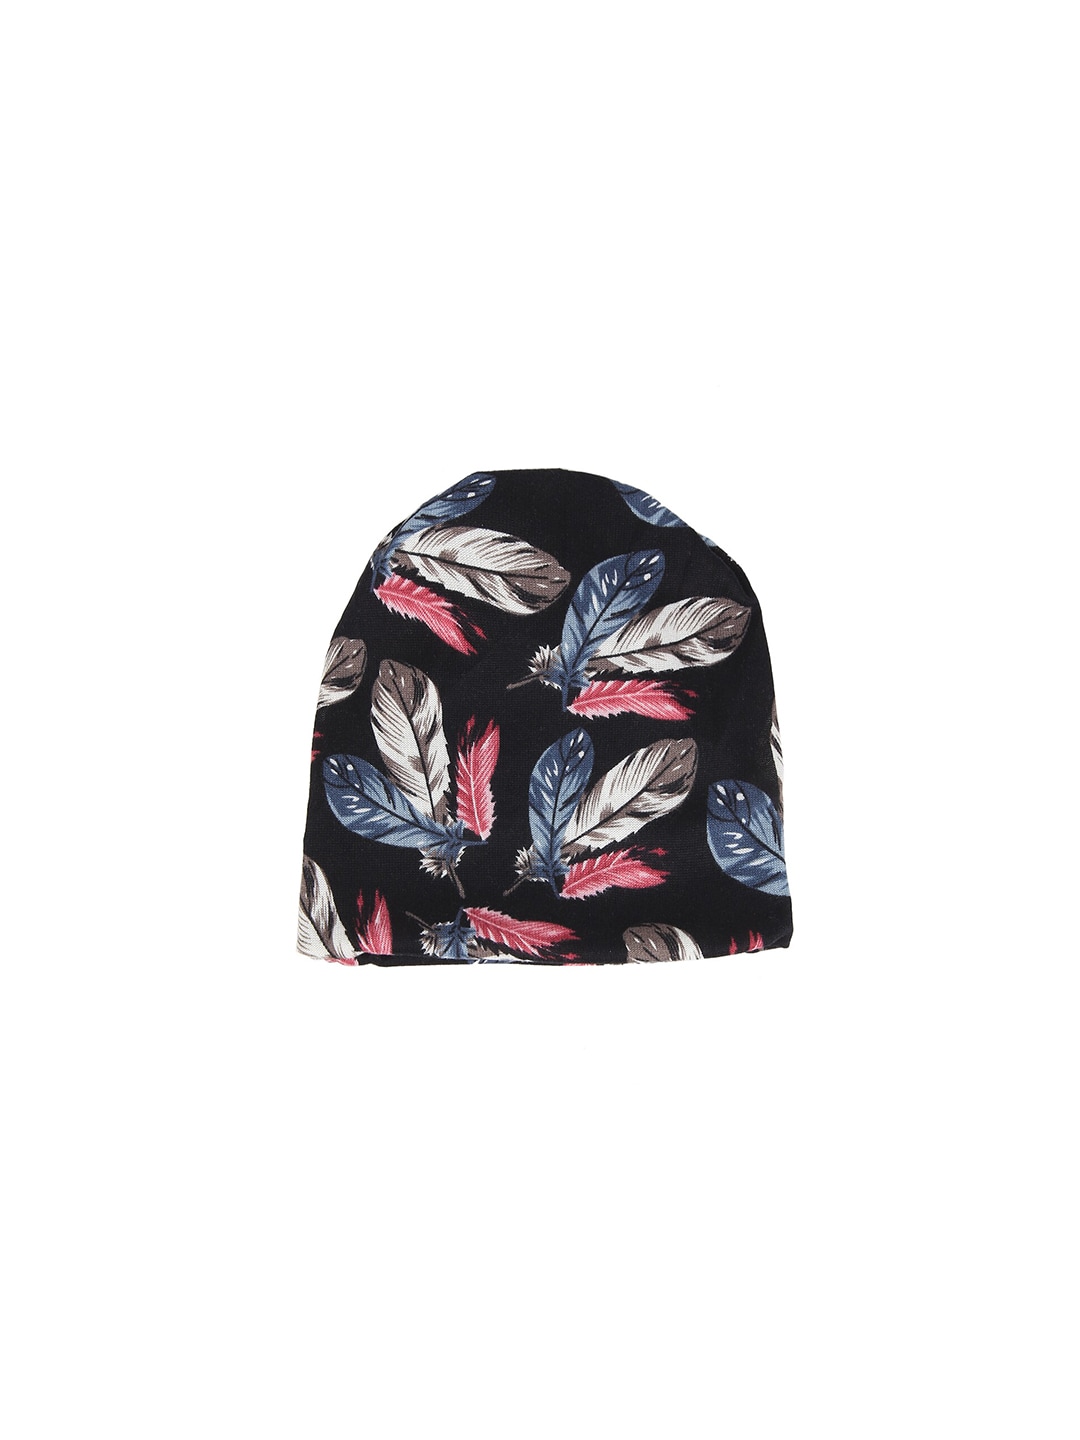 iSWEVEN Unisex Black & White Cotton Printed Beanie Price in India